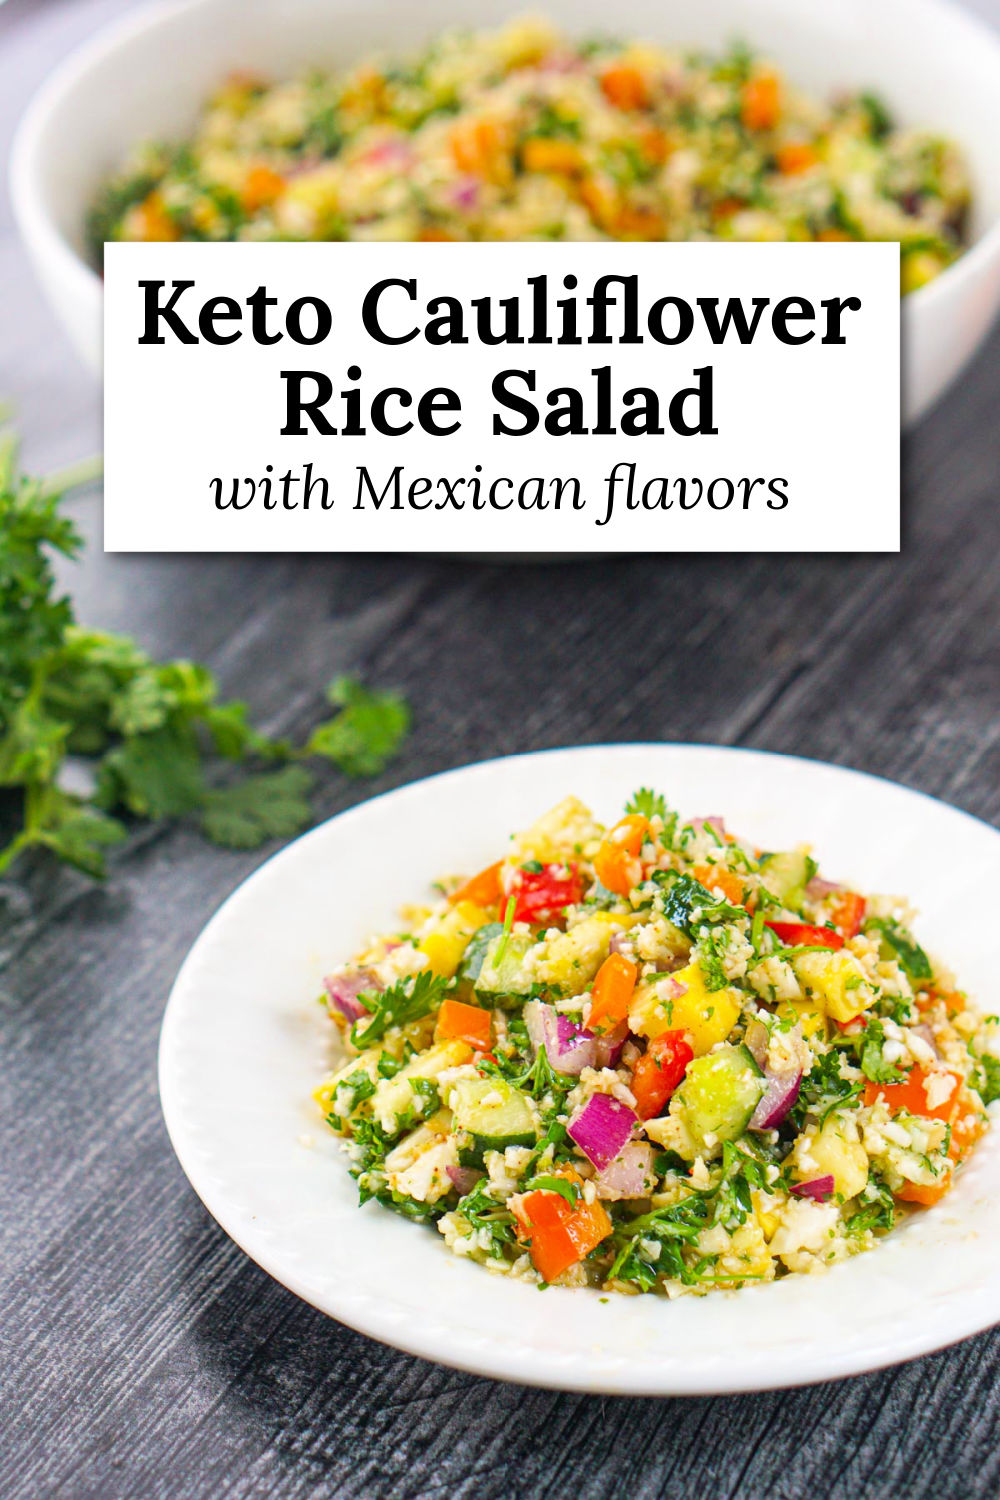 bowl and plate with keto cauliflower rice salad and fresh herbs and text